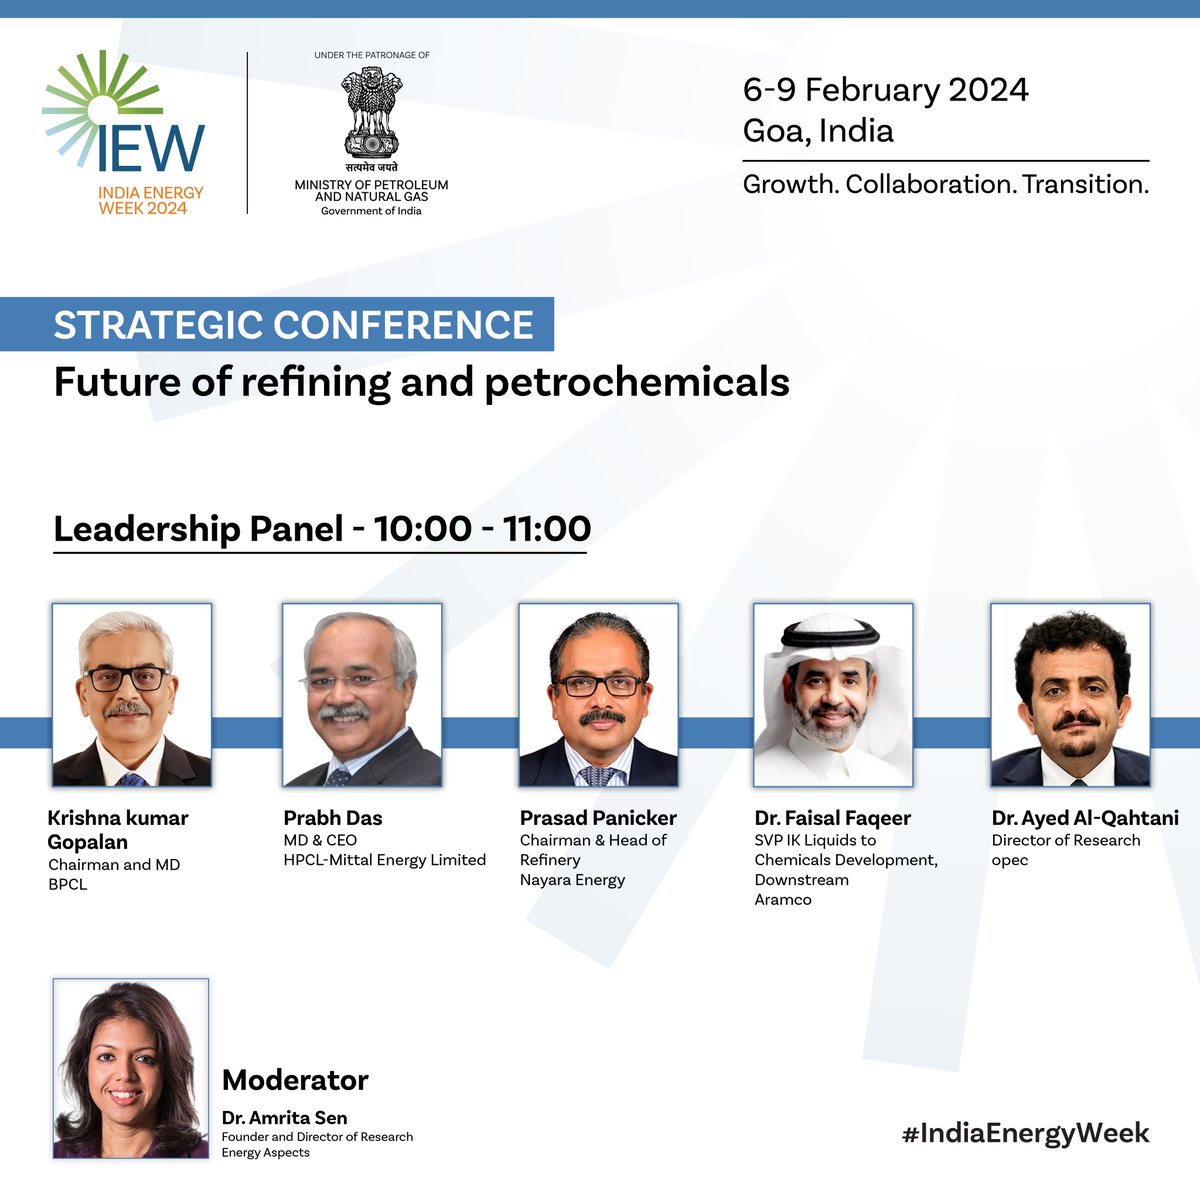 Join us at the Executive Sessions Theatre for a compelling Leadership Panel discussion on 'The Future of Refining and Petrochemicals.' Hear from industry leaders Krishnakumar Gopalan, Prabh Das, Prasad Panicker, Dr. Faisal Faqeer, and Dr. Ayed Al-Qahtani as they delve into…